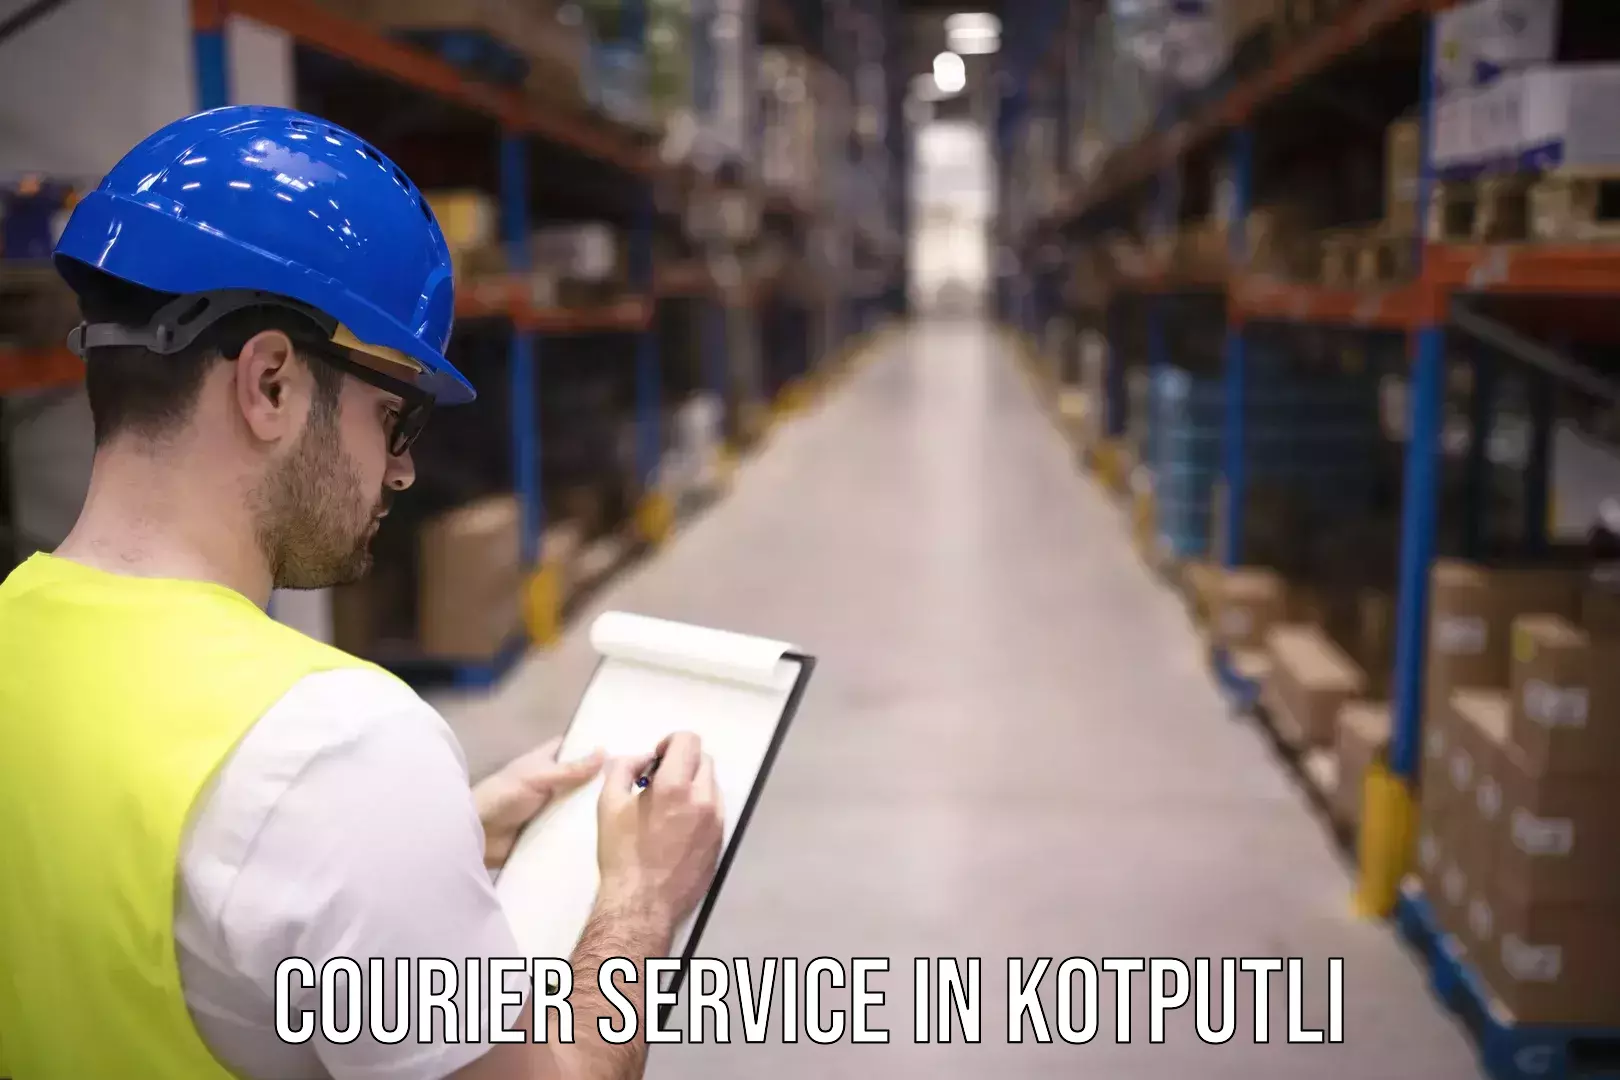 Postal and courier services in Kotputli